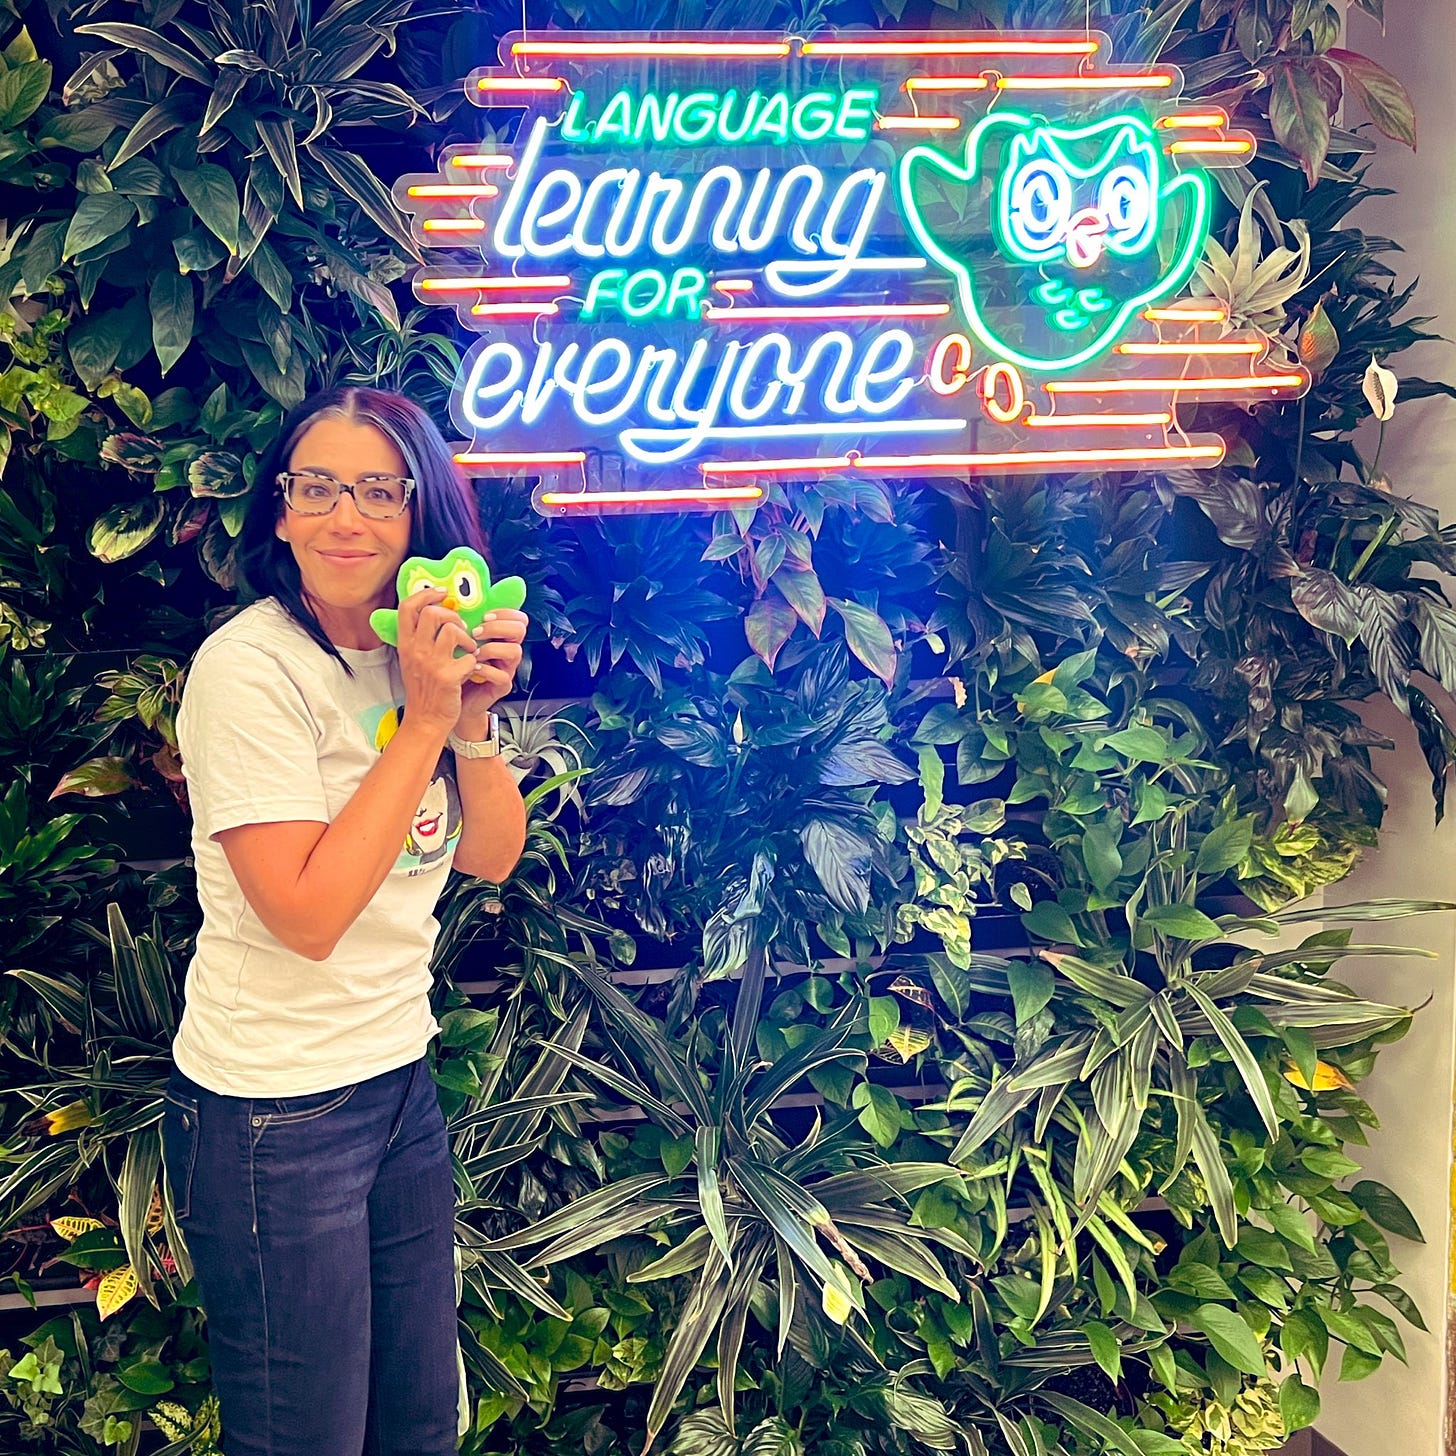 Photo of me in blue jeans and a cream t-shirt with Sally Wiggin popart on the front standing in front of a wall of greenery while holding a small stuffed green Duo owl. There is a neon sign on the greenery wall that says "Language learning for everyone."